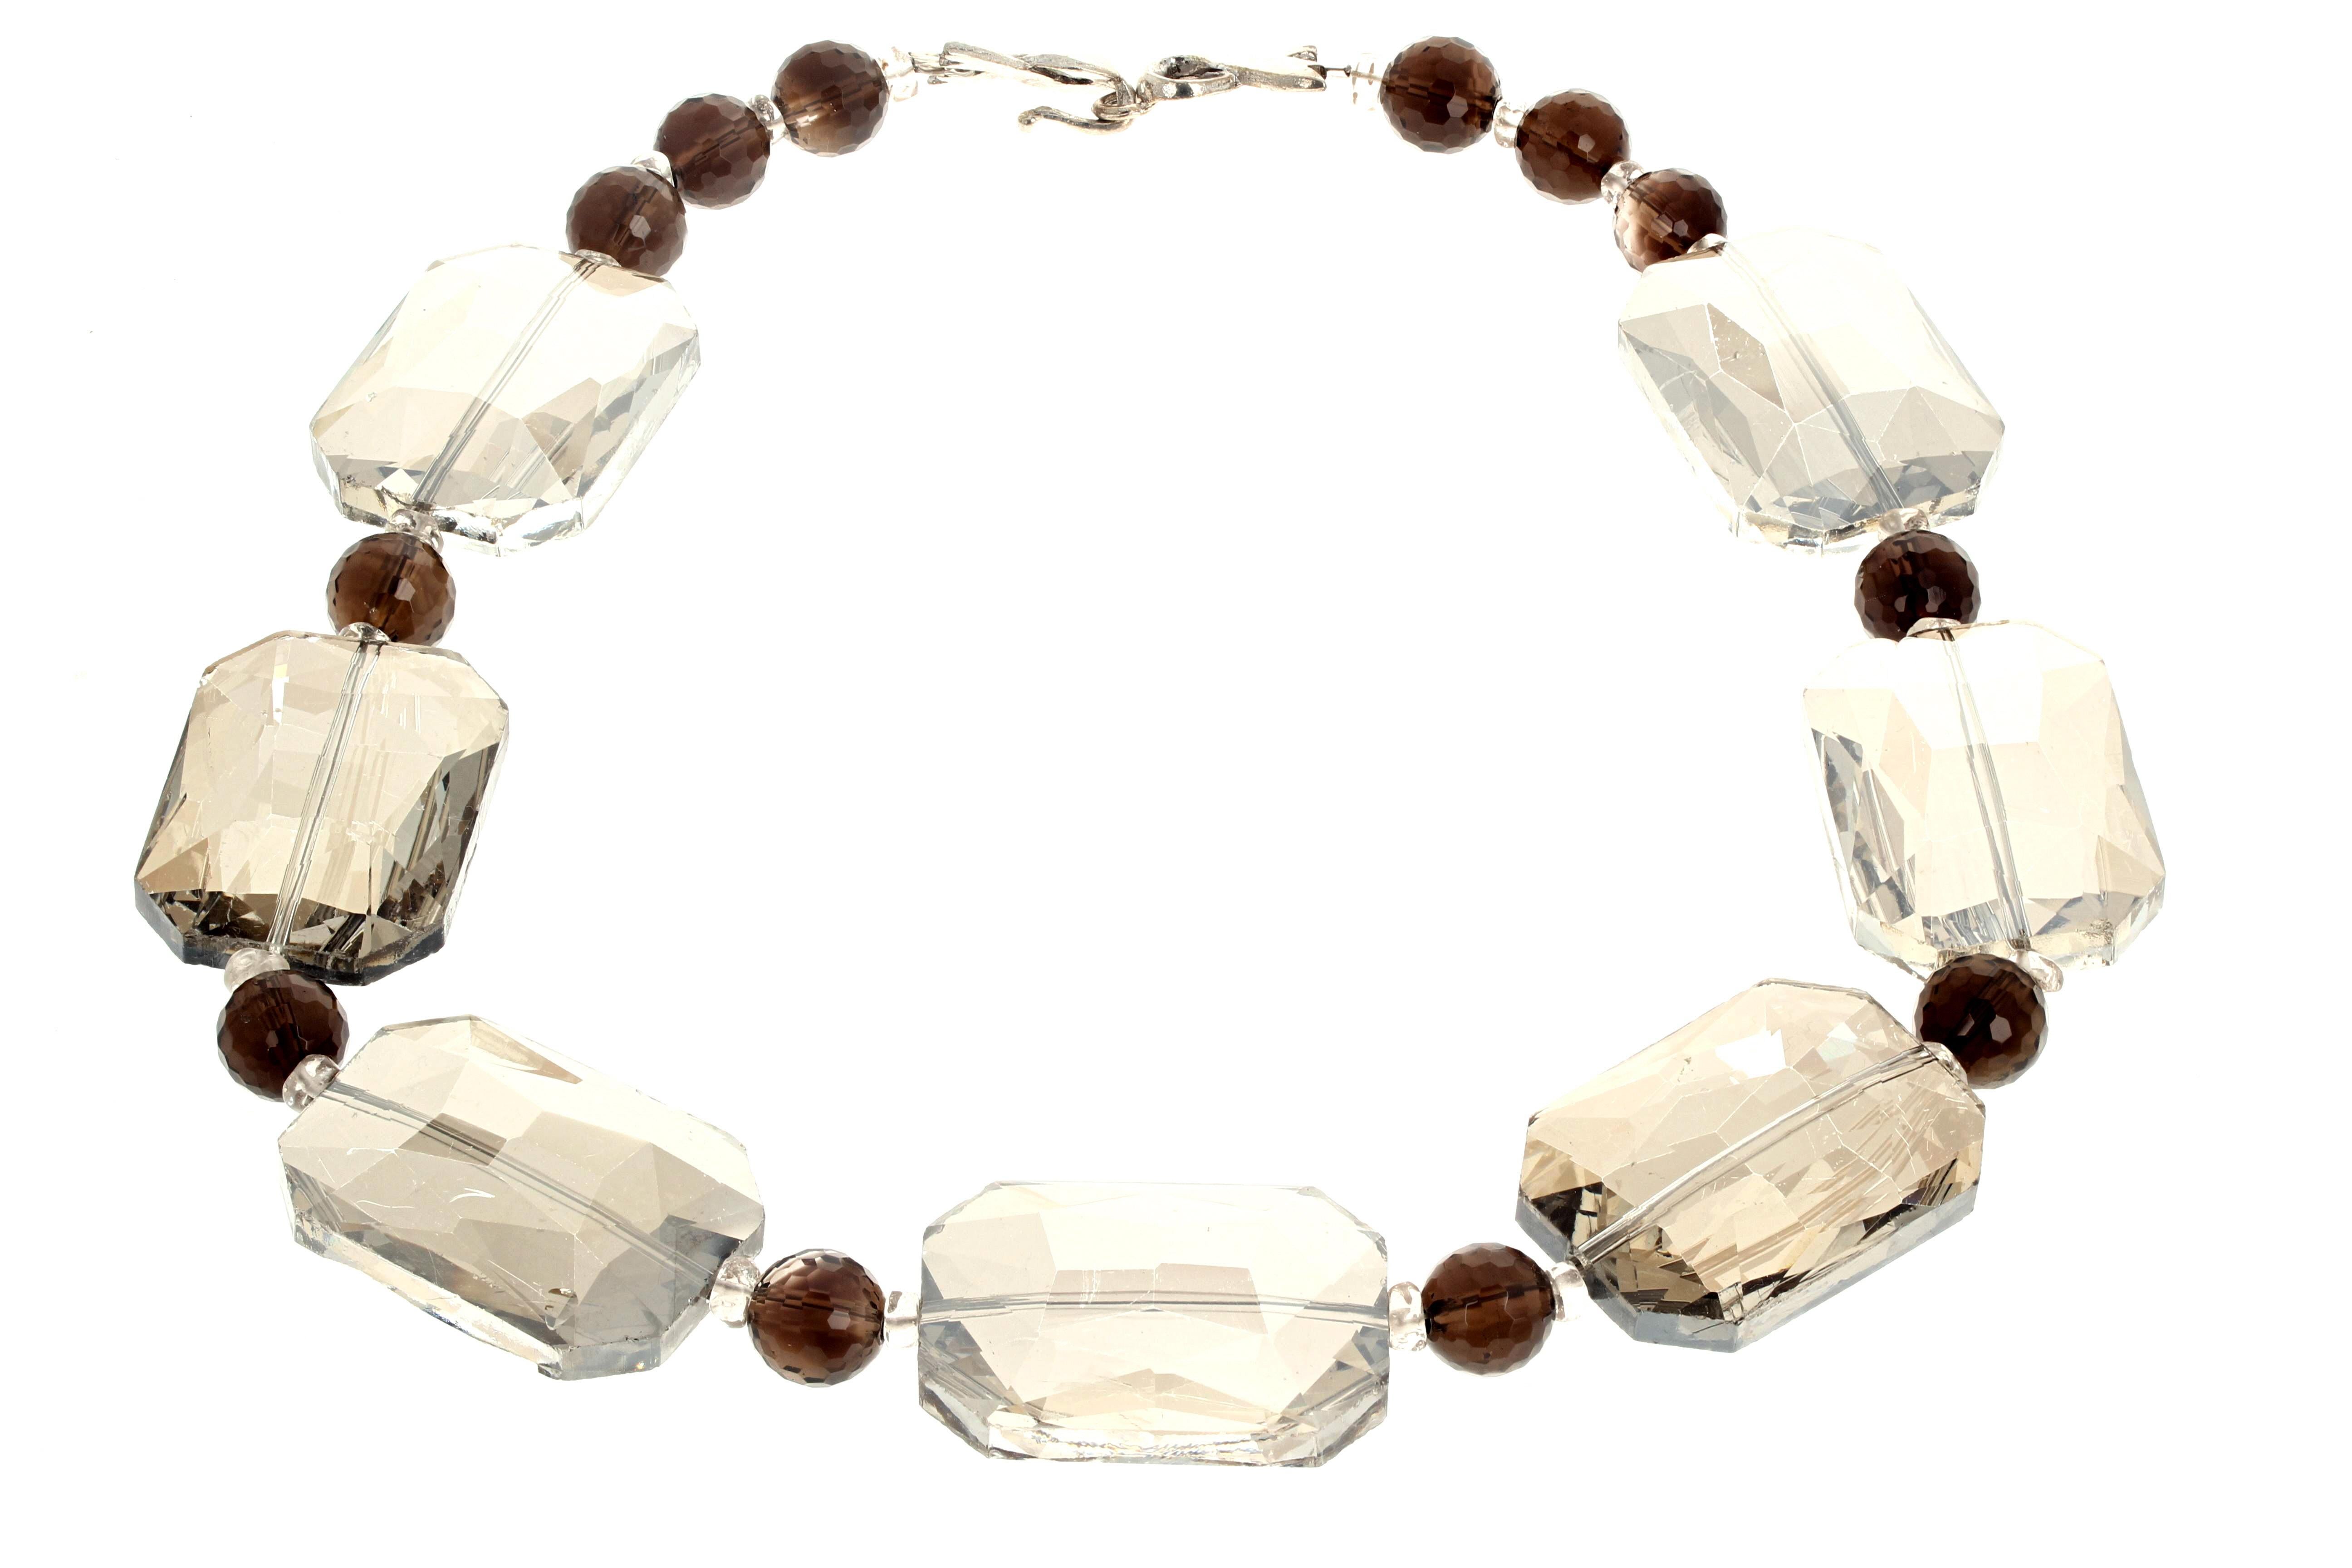 This fascinating necklace is 17 inches long and is composed of large Mystic Quartz (35mm x 24mm) enhanced with sparkling gem cut natural 10mm Smoky Quartz.  This has an easy to use silvery hook clasp.  (Mystic quartz is natural real cut quartz which